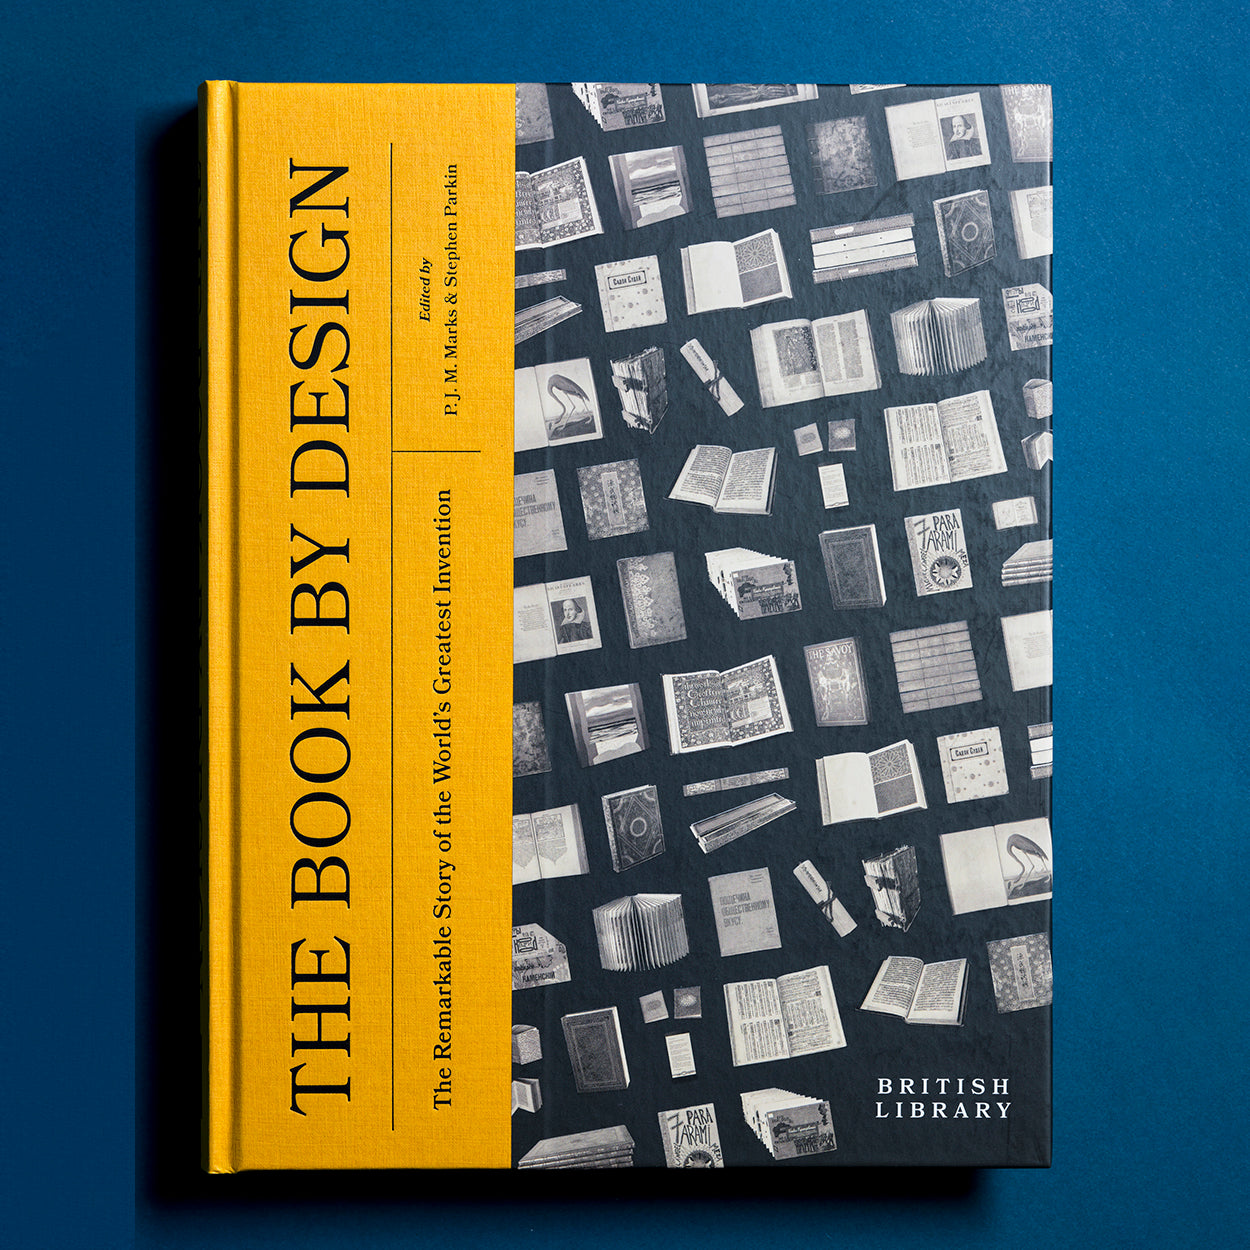 The Book by Design: The Remarkable Story of the World's Greatest Invention [Book]